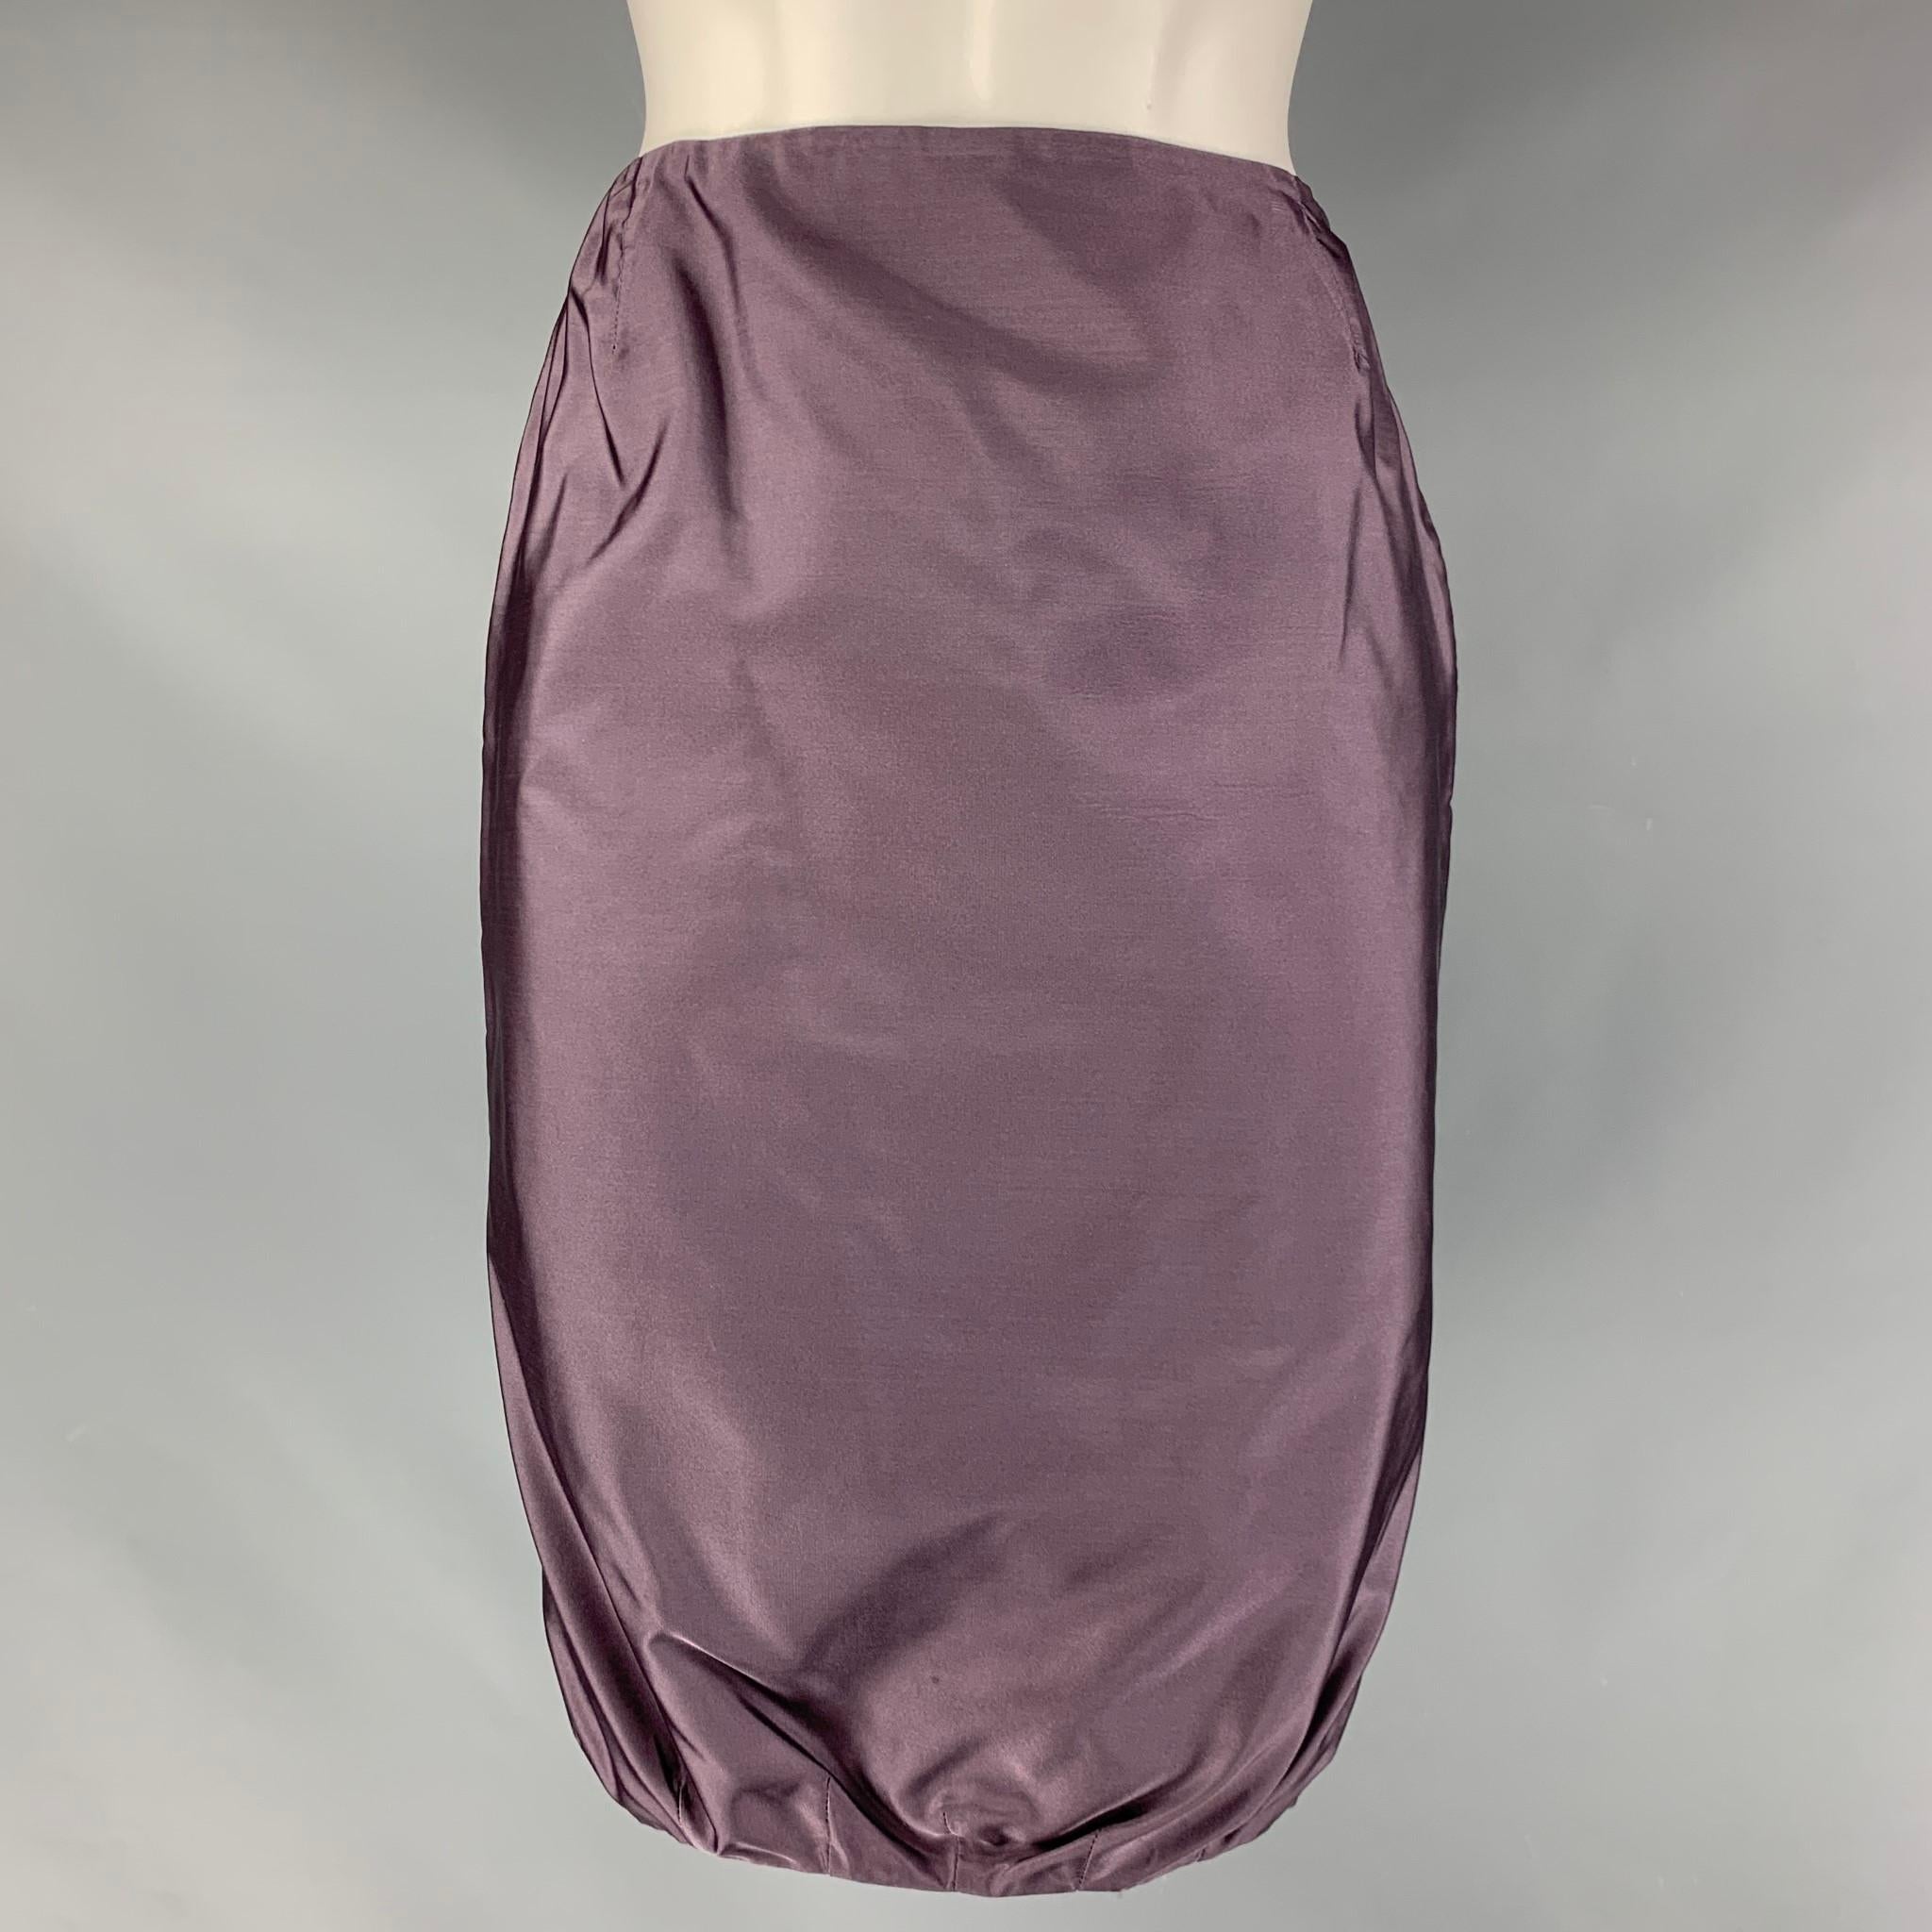 PRADA skirt comes in a lilac silk material featuring a bubble hem, and a side seam zipper closure. Made in Italy.

Excellent Pre-Owned Condition.
Marked: 40

Measurements:

Waist: 24 in.
Hip: 35 in.
Length: 22 in.  